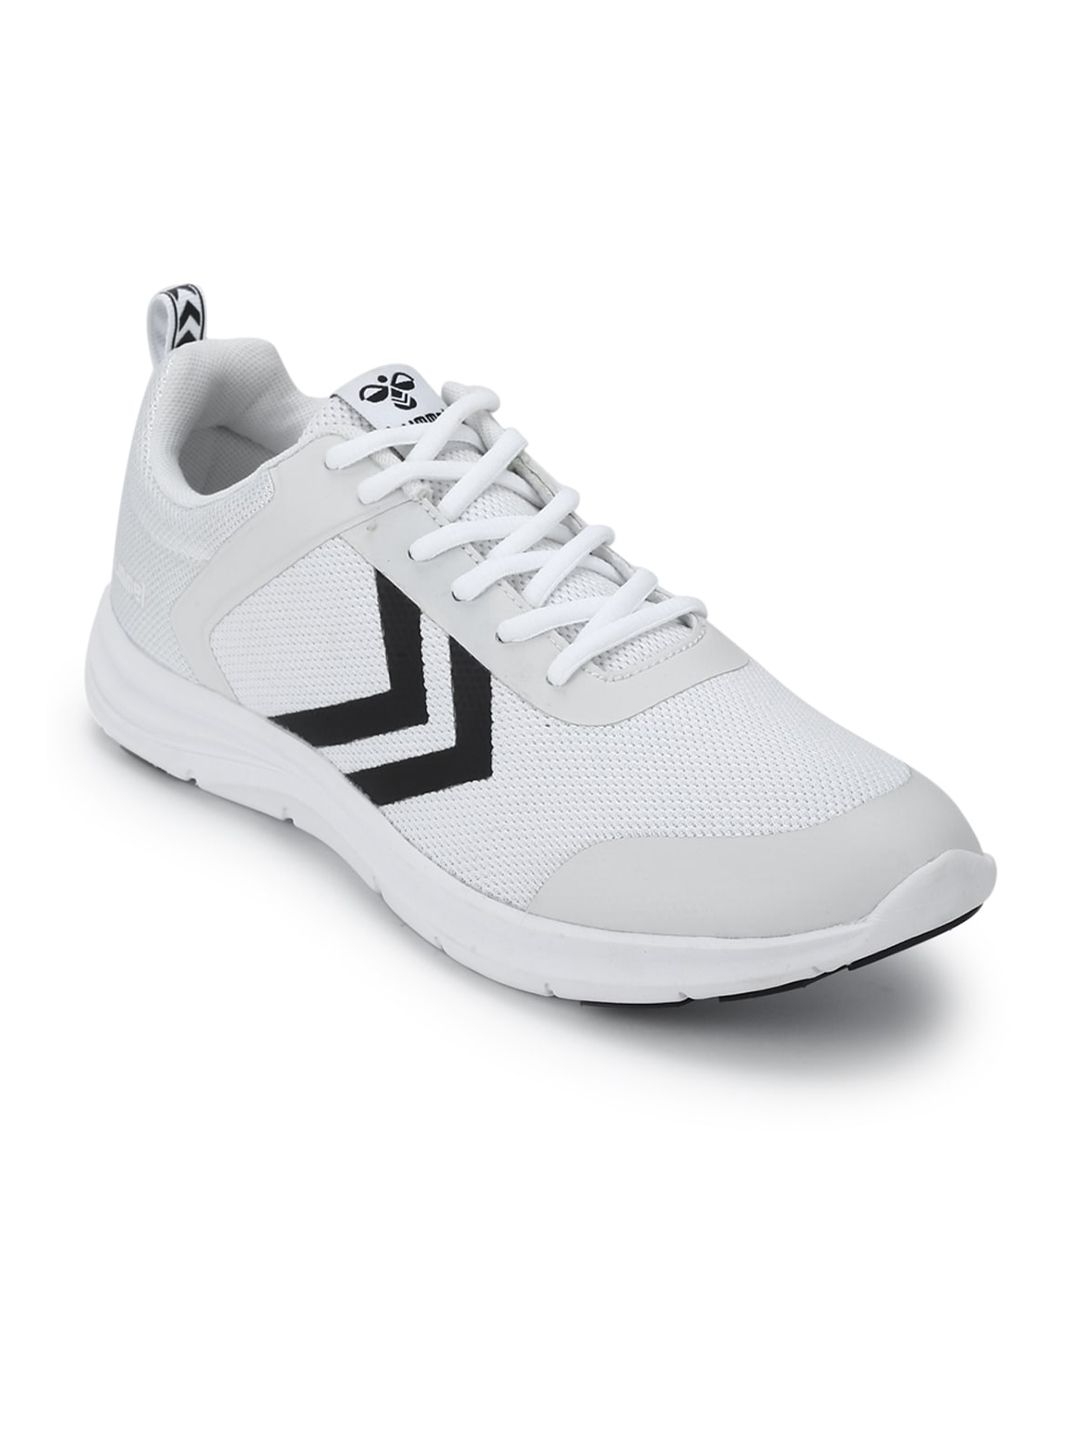 hummel Unisex White Mesh Training or Gym Non-Marking Shoes Price in India